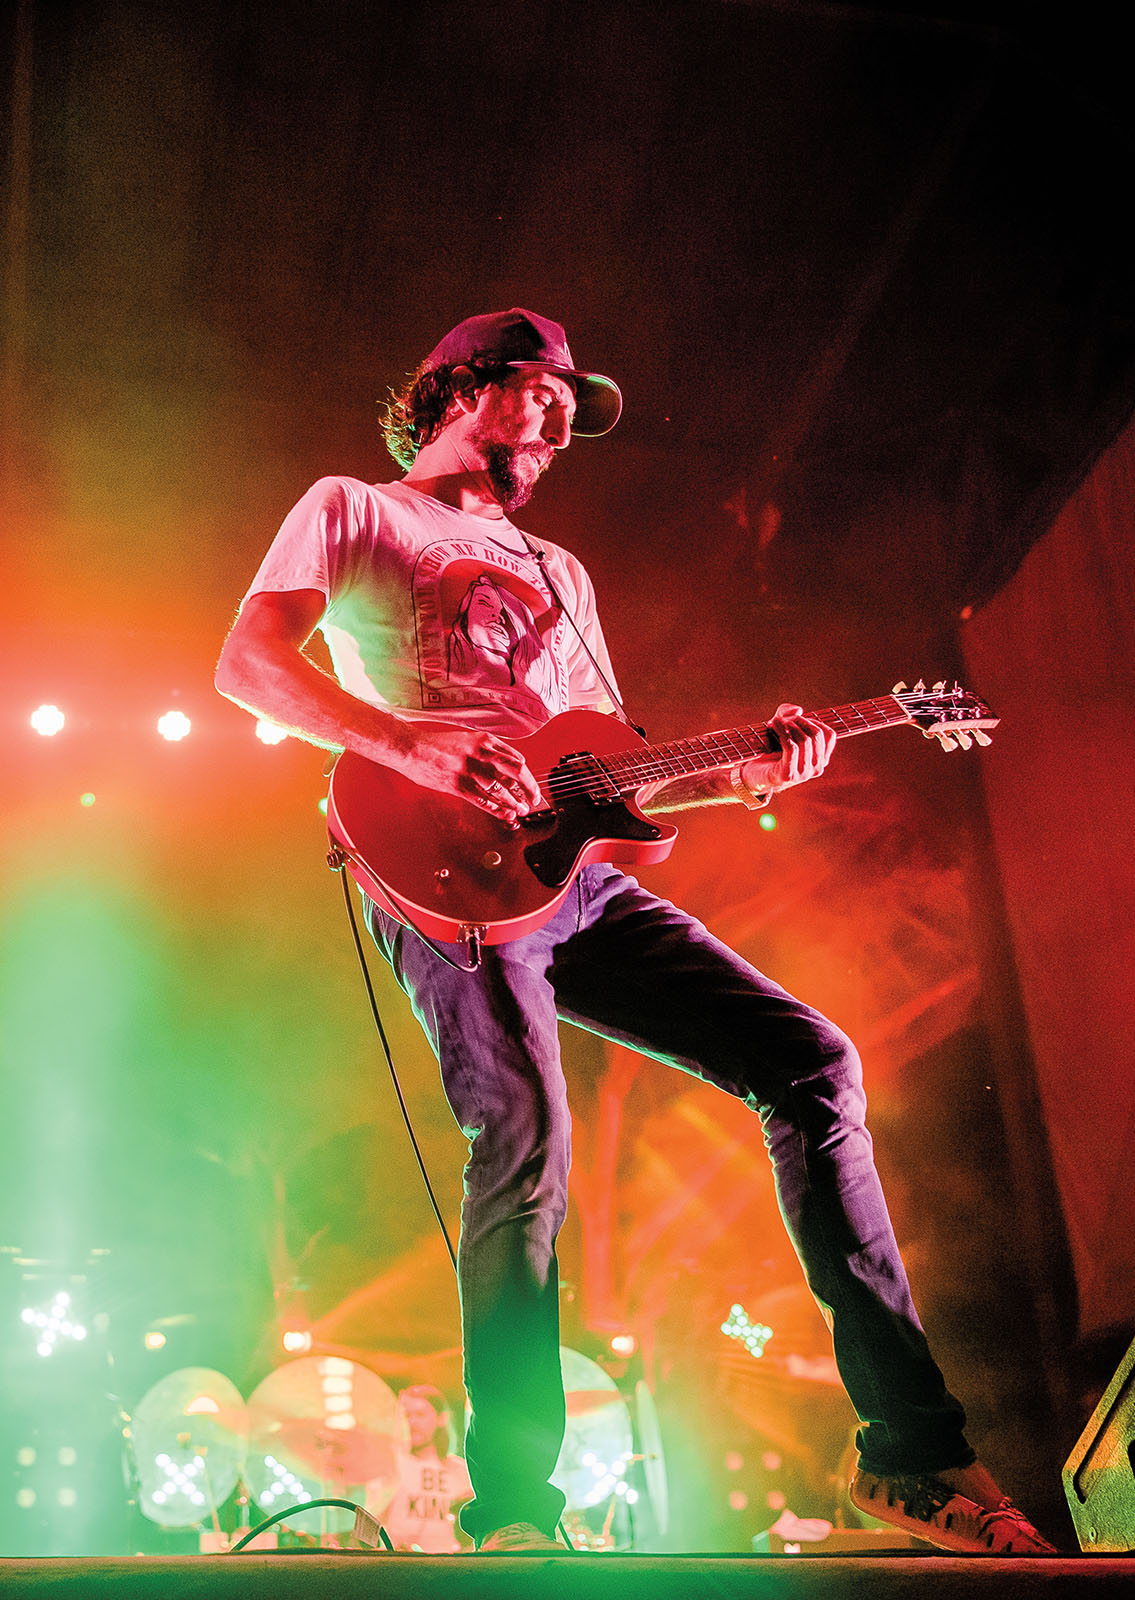 A man in a baseball cap strums an electric guitar and taps his foot on a stage in front of orange and green gel lights